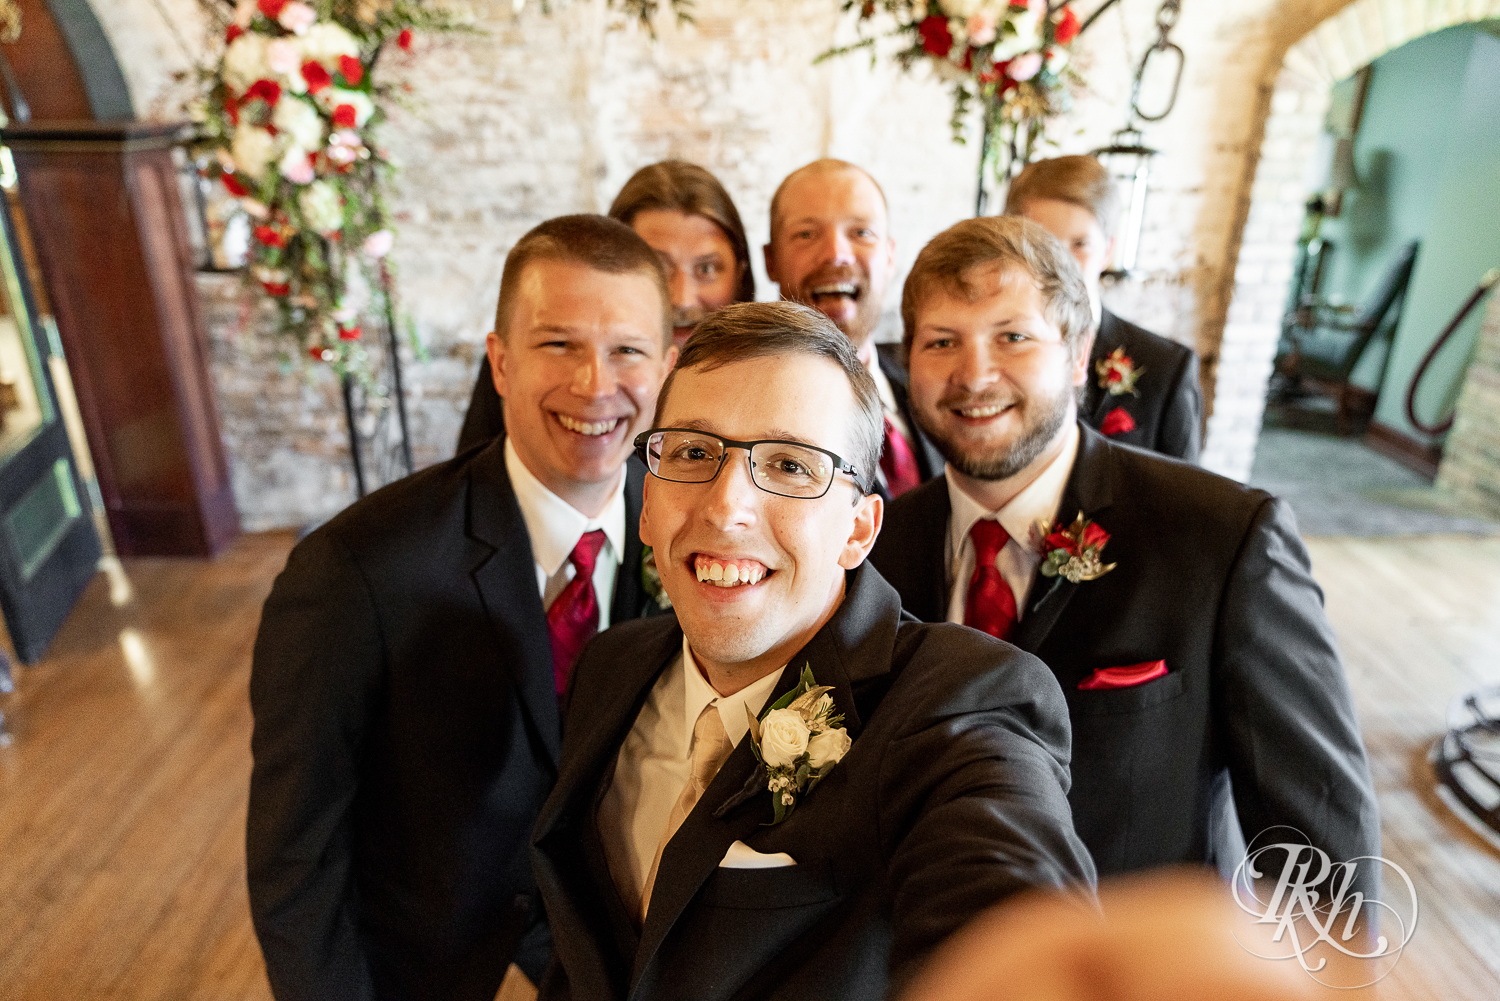 Wedding party in black suits smiling at Kellerman's Event Center in White Bear Lake, Minnesota.